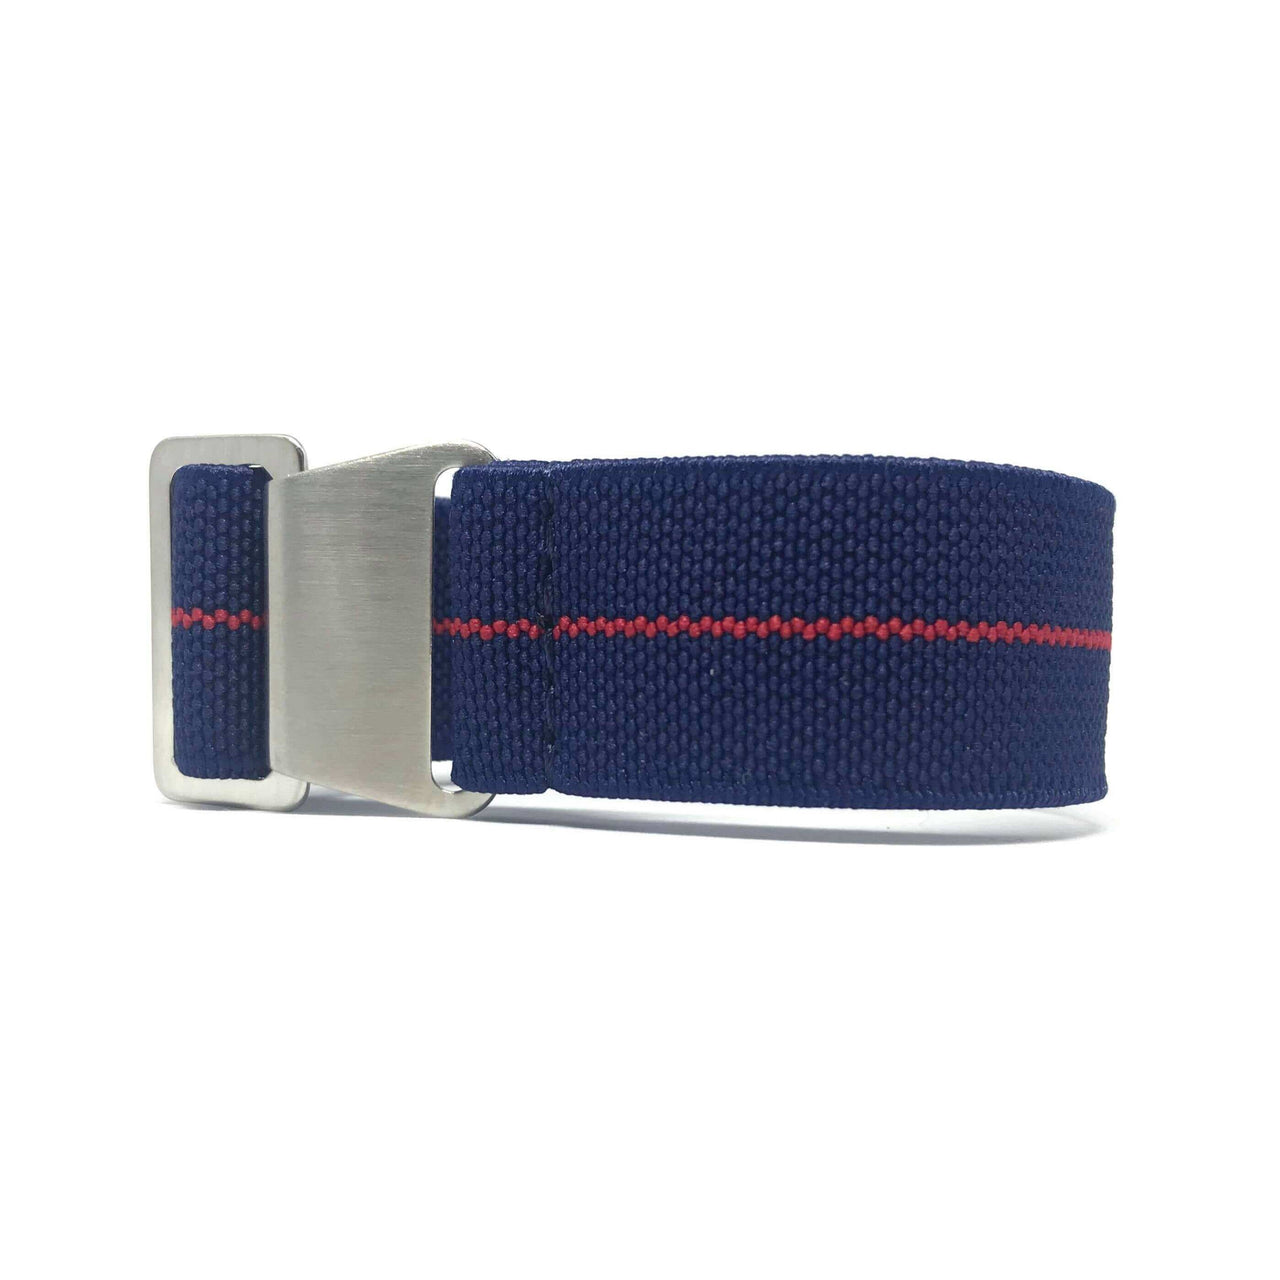 Marine Nationale Military Style Elastic Strap - Blue & Red